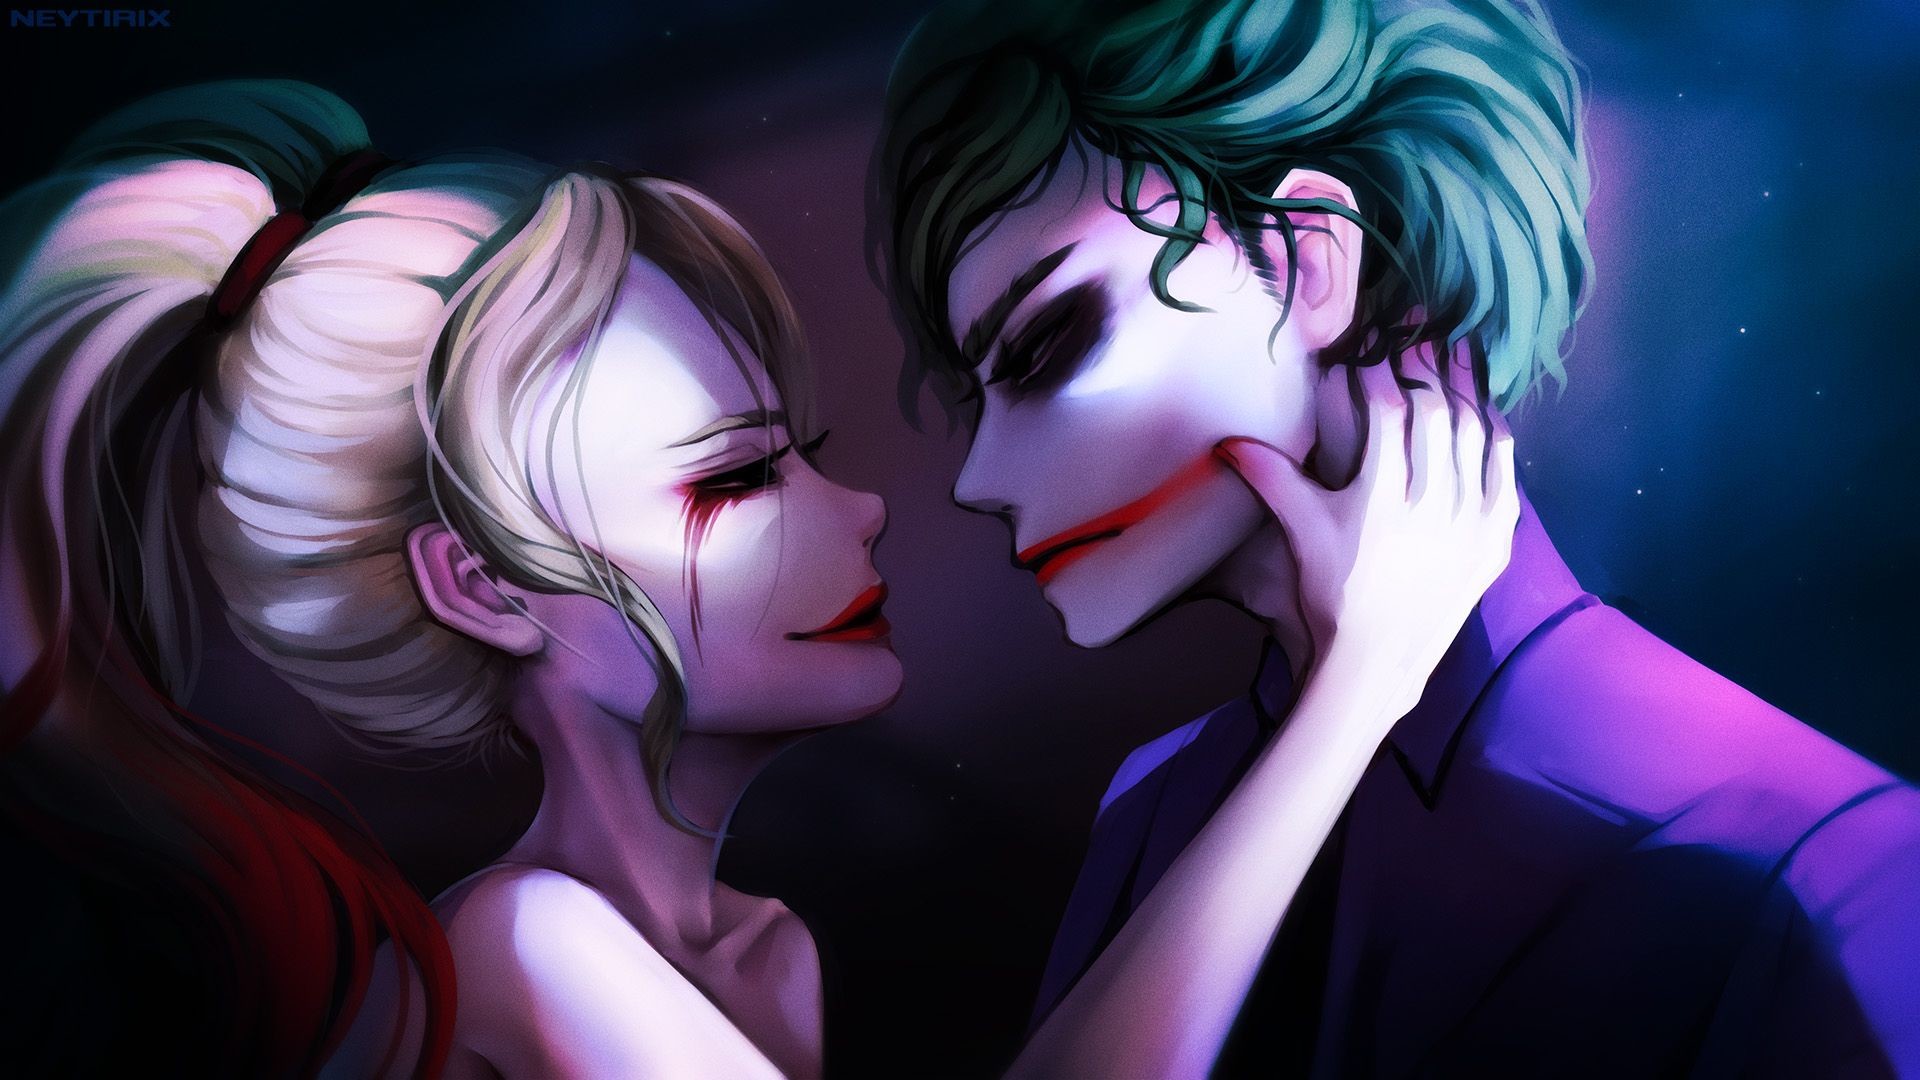 1920x1080 694x1152 Joker And Harley Quinn Suicide Squad Wallpaper Hd">